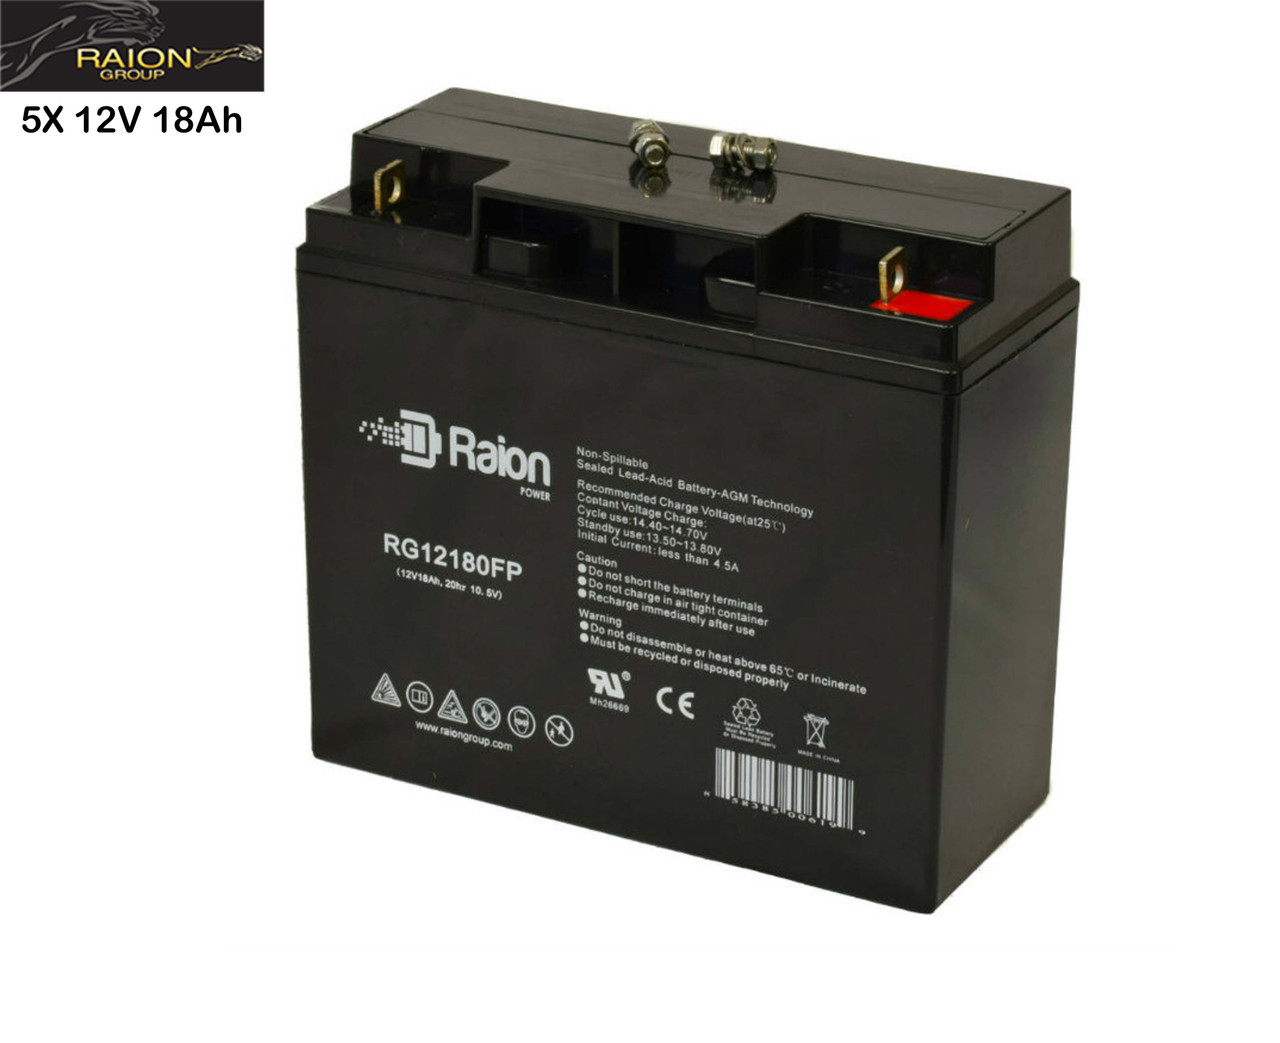 Raion Power Replacement 12V 18Ah Battery for TaoTao Freedom Plus - 5 Pack